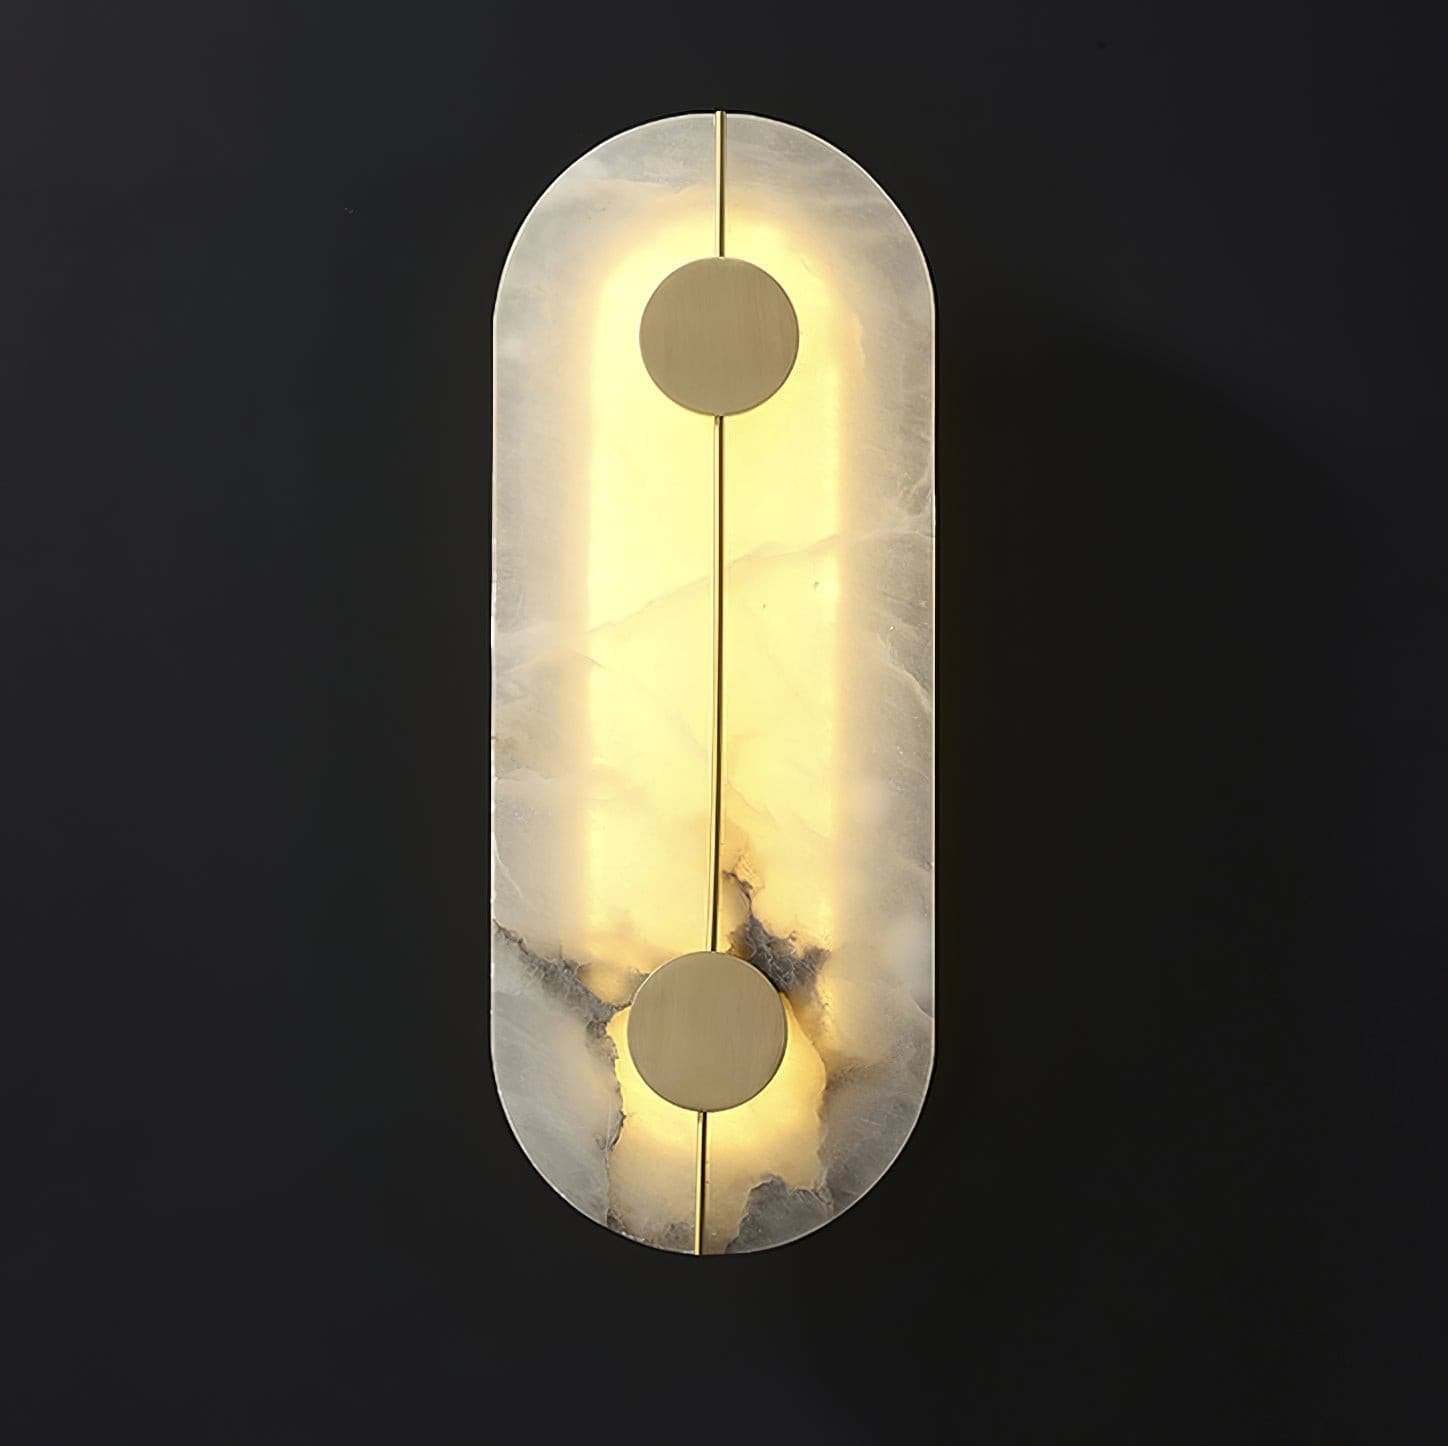 Artistic Wall Lamp with Marble Design, 6.5" Diameter x 16.7" Height, 16.5cm Diameter x 42.5cm Height, White and Brass Finish, Cool Lighting